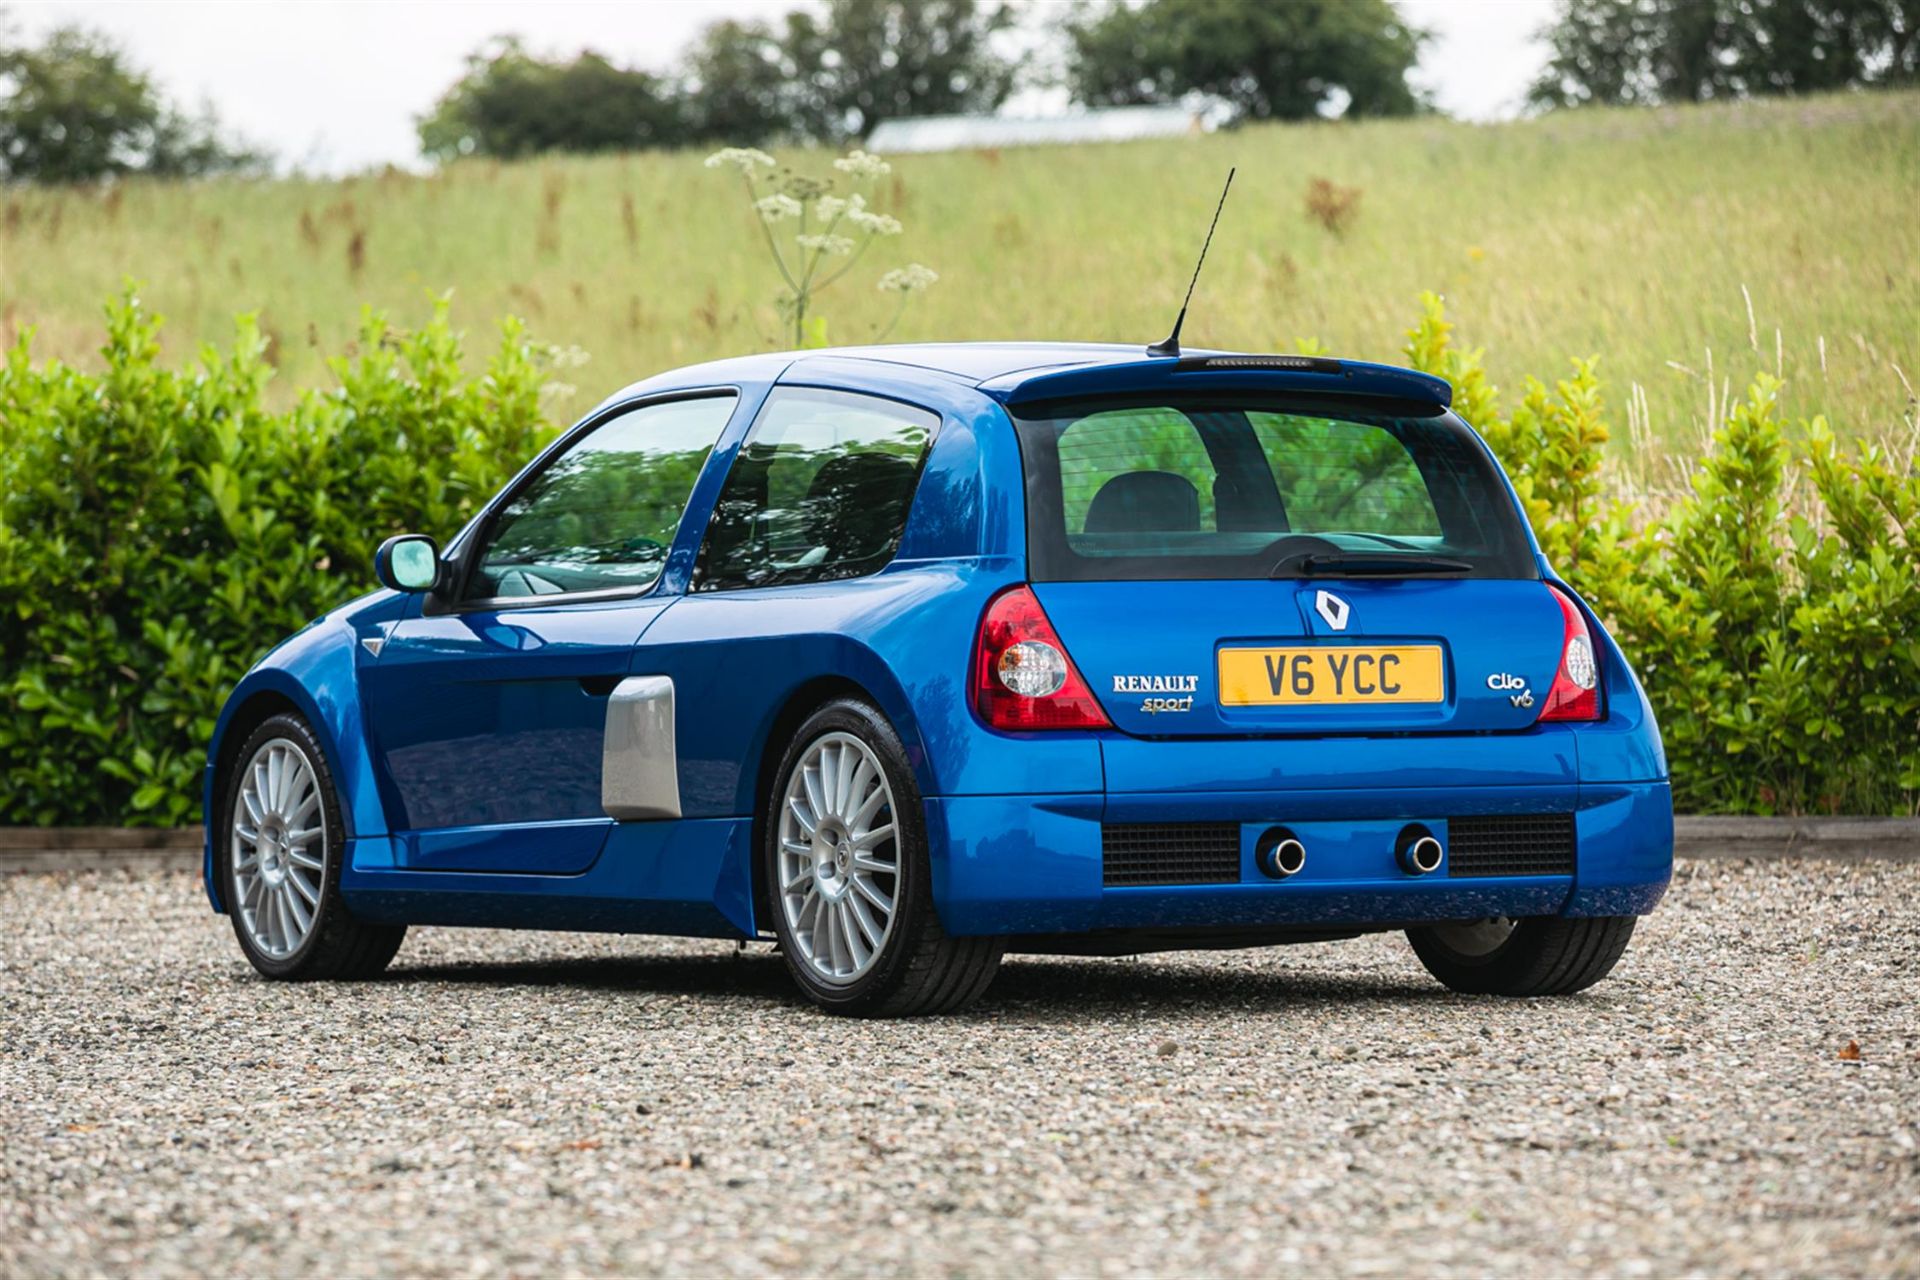 2003 Renault Clio V6 RenaultSport (255) Phase 2 - Image 4 of 10